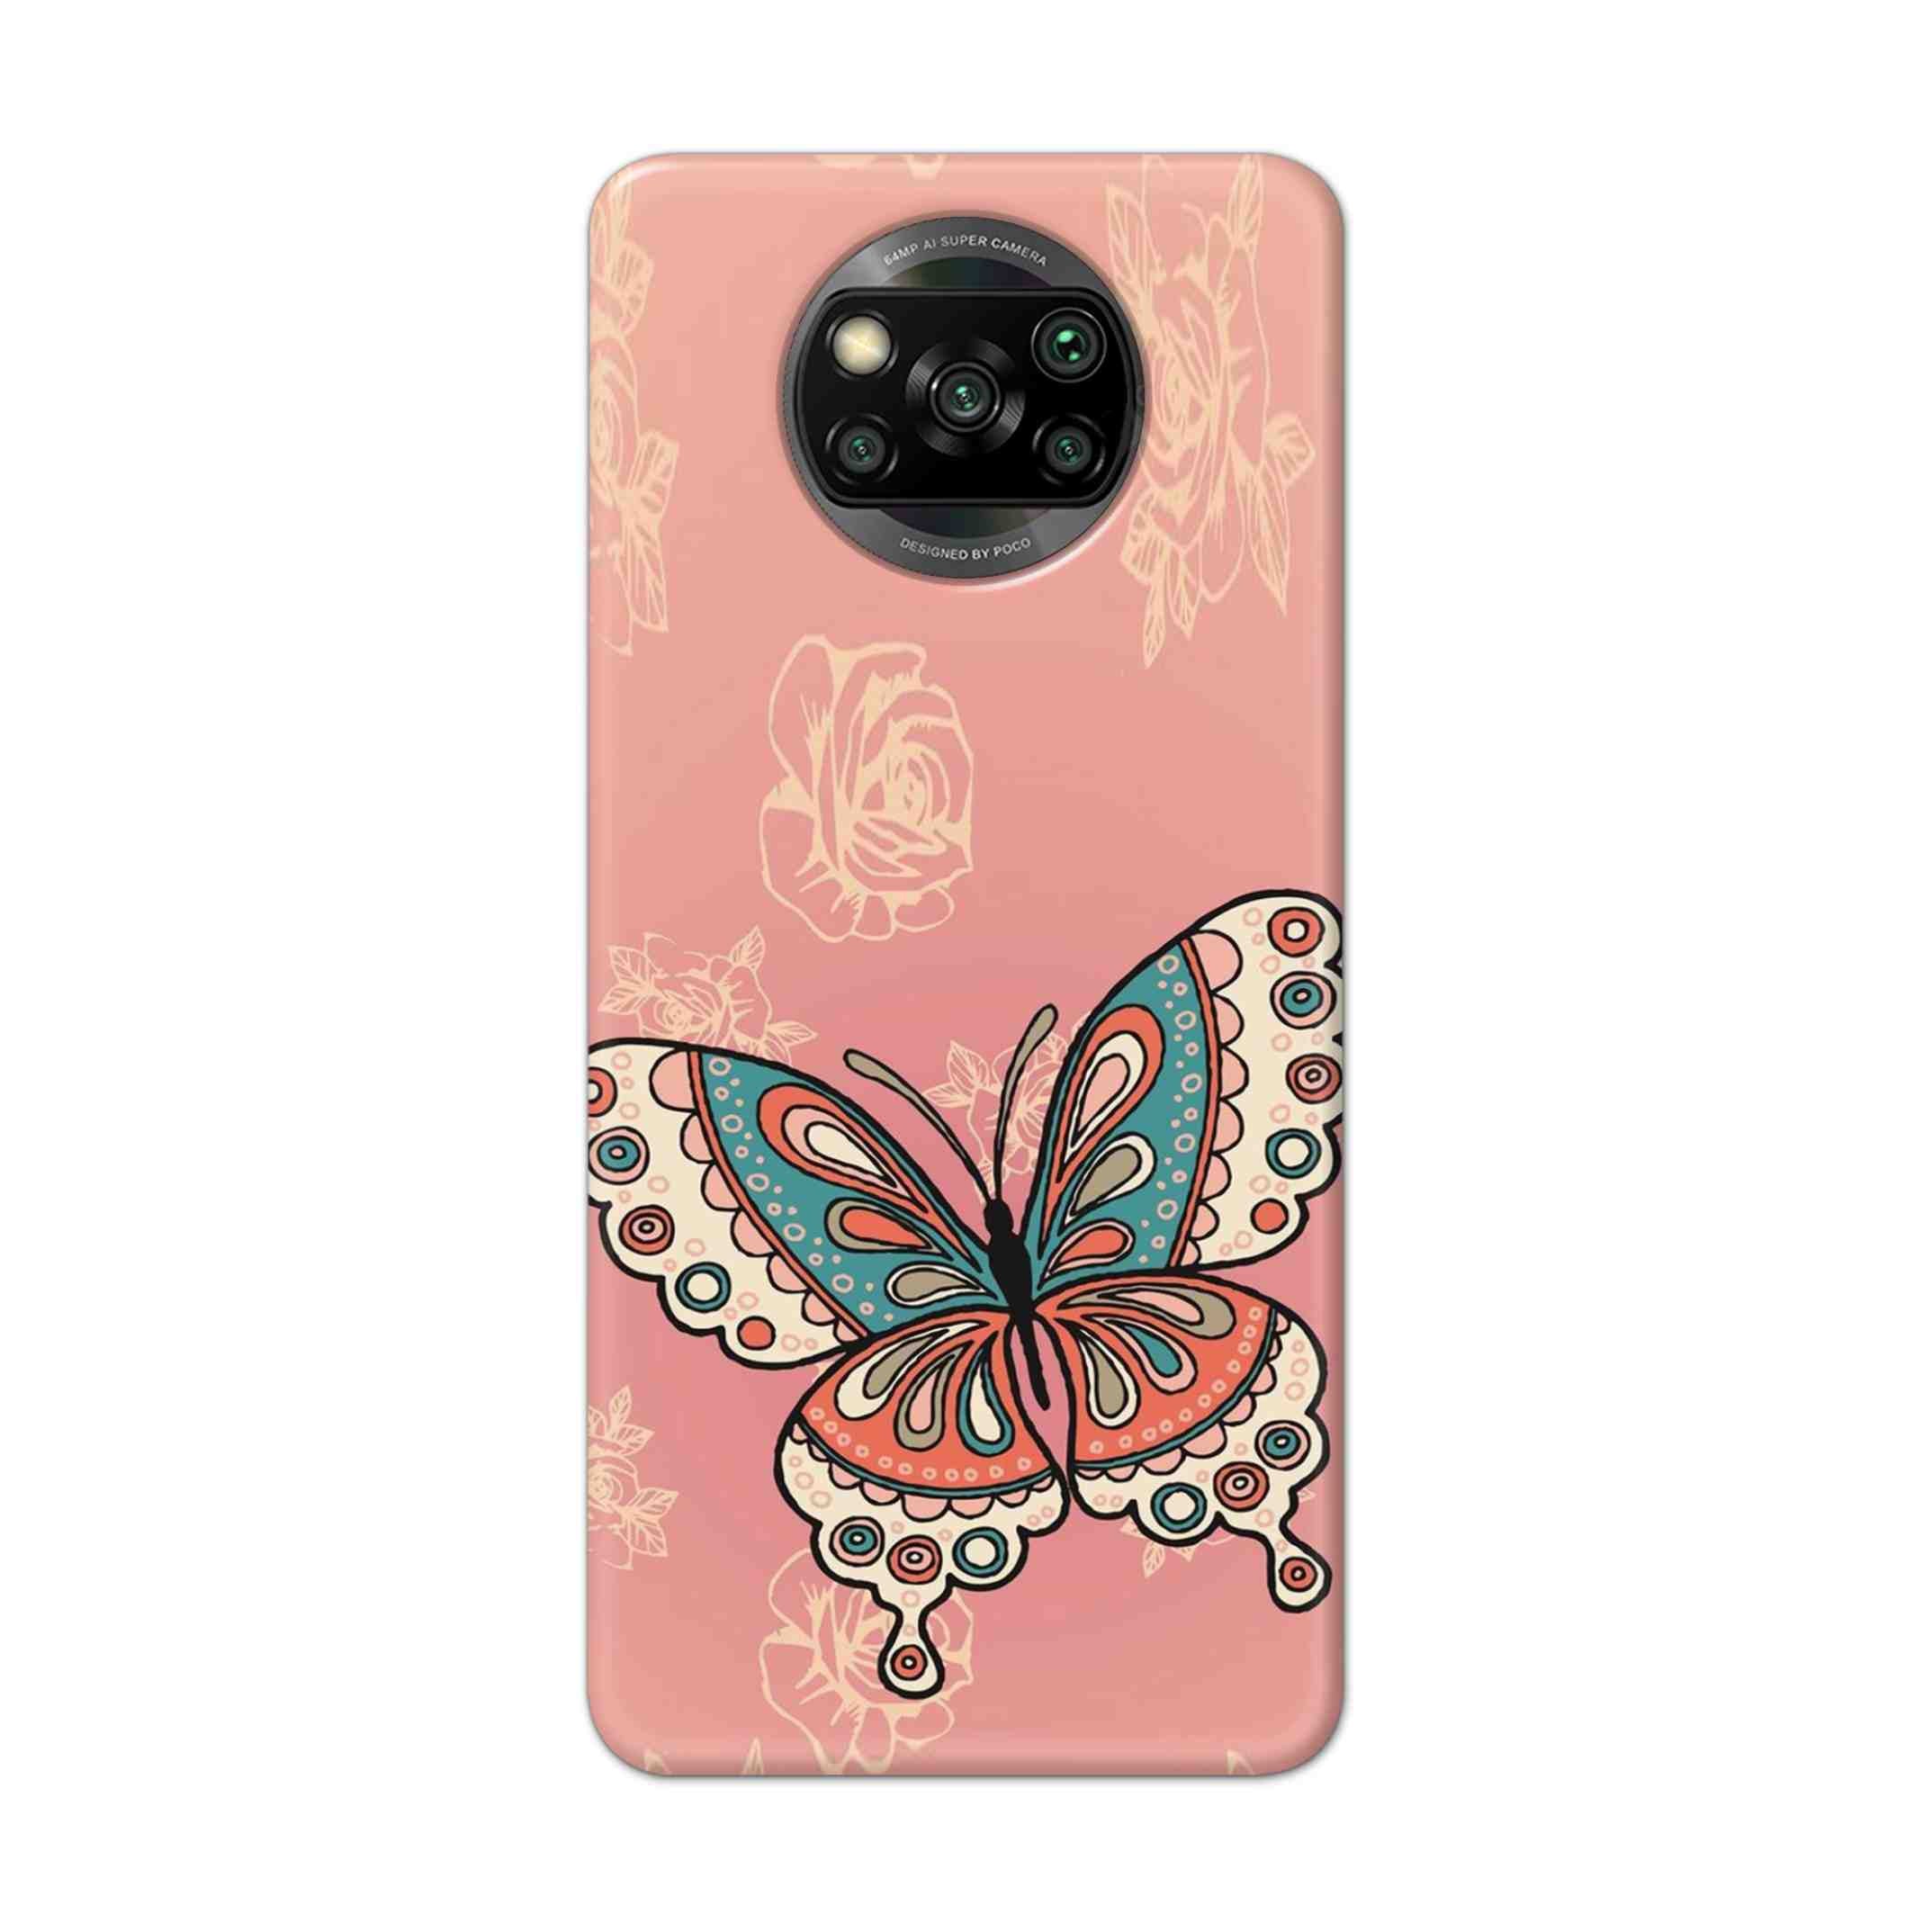 Buy Butterfly Hard Back Mobile Phone Case Cover For Pcoc X3 NFC Online